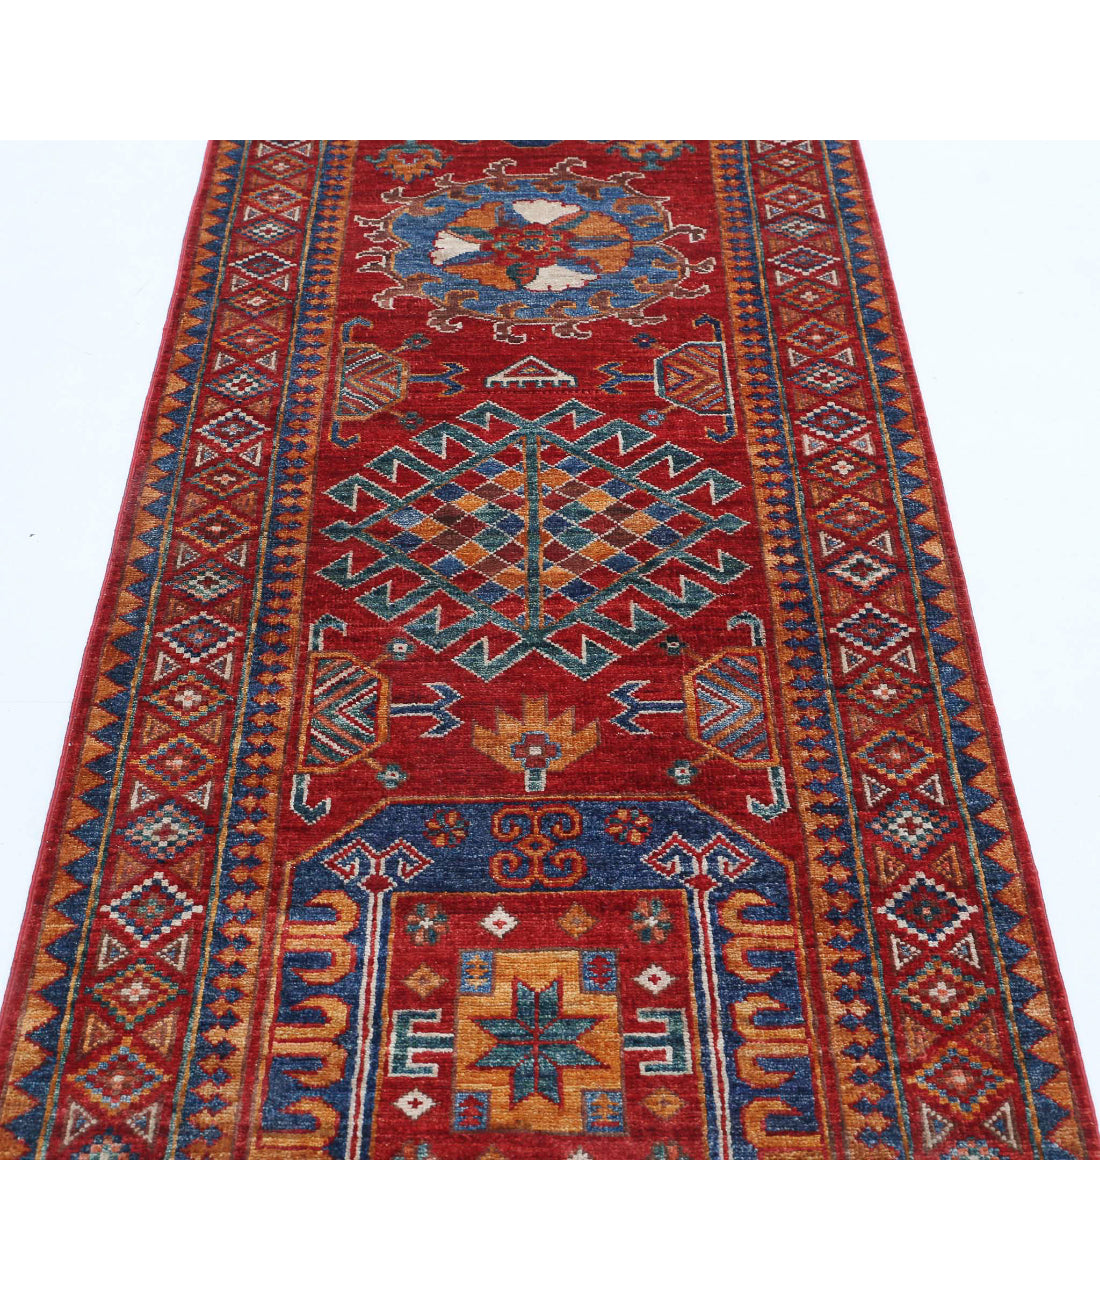 Hand Knotted Nomadic Caucasian Humna Wool Rug - 2'9'' x 8'1'' 2'9'' x 8'1'' (83 X 243) / Red / Blue